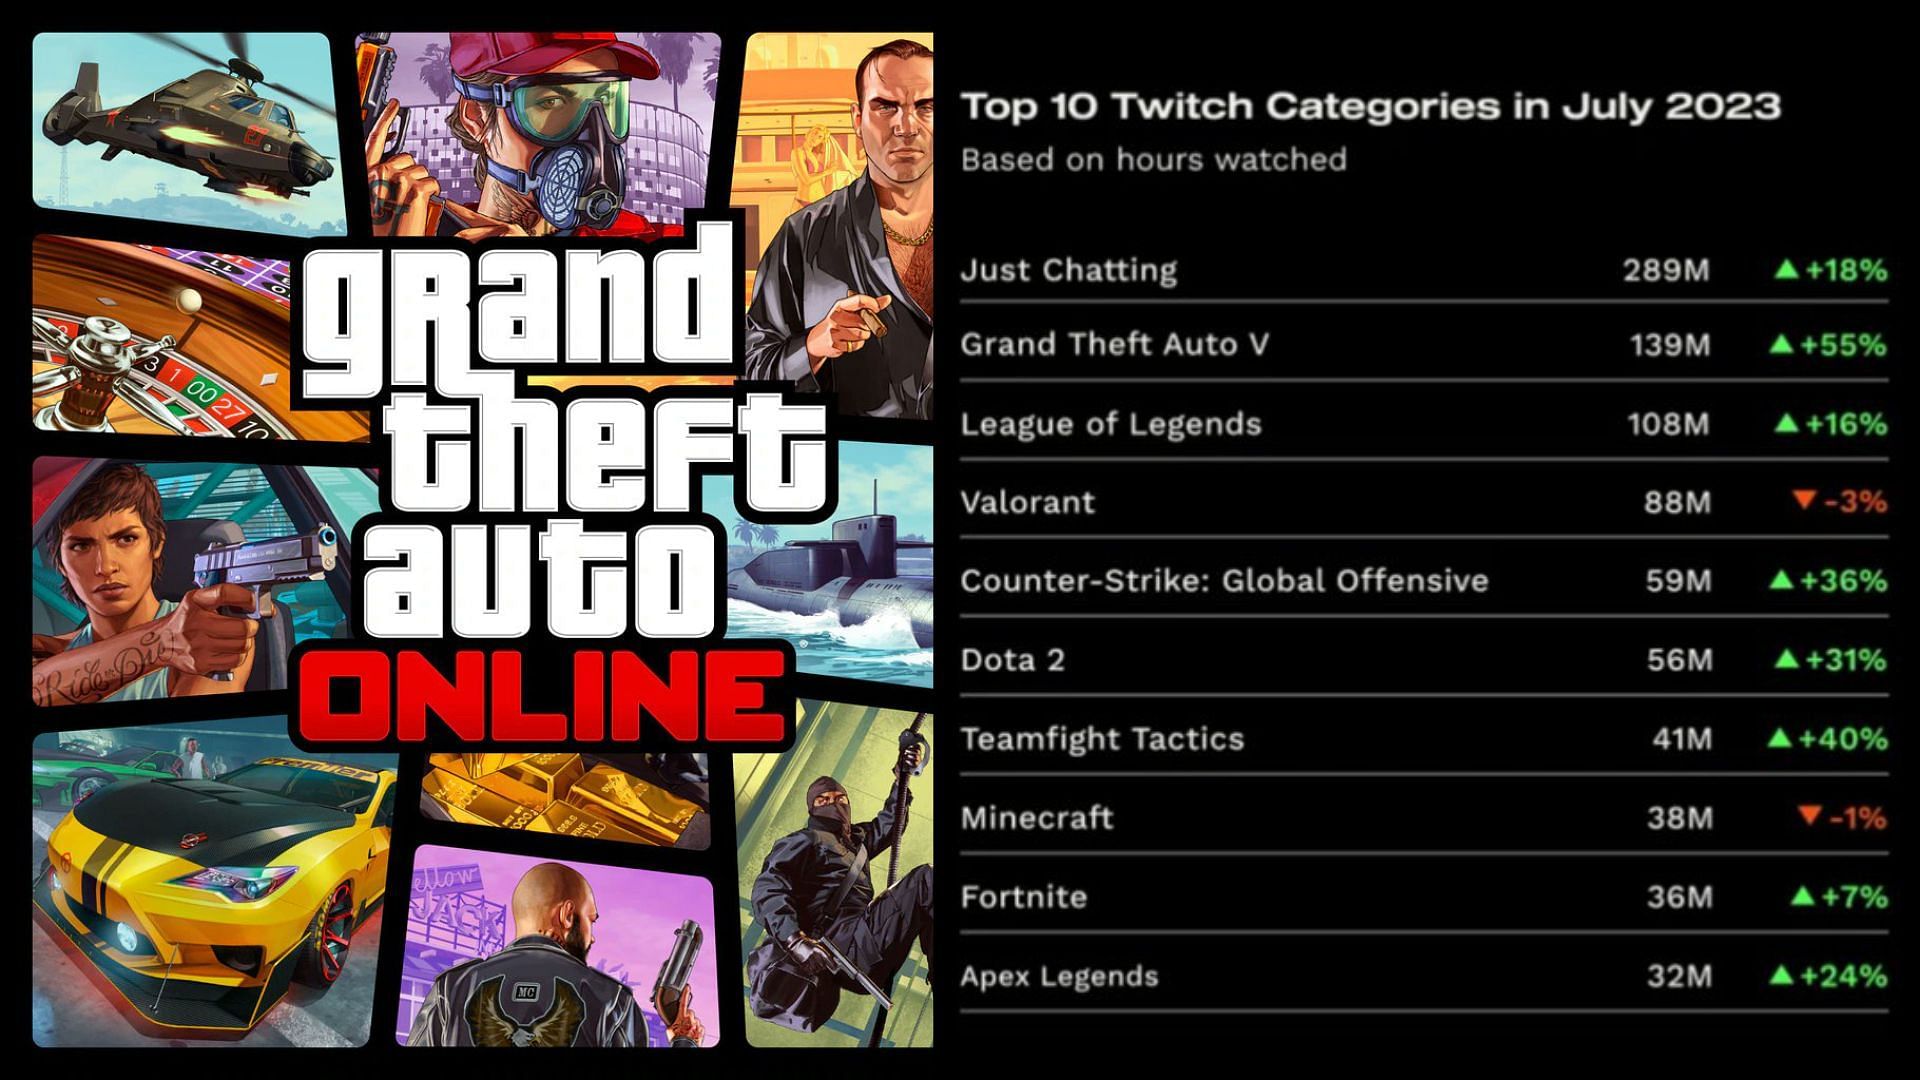 GTA 5 is replacing Just Chatting as Twitch's most popular category - Dexerto